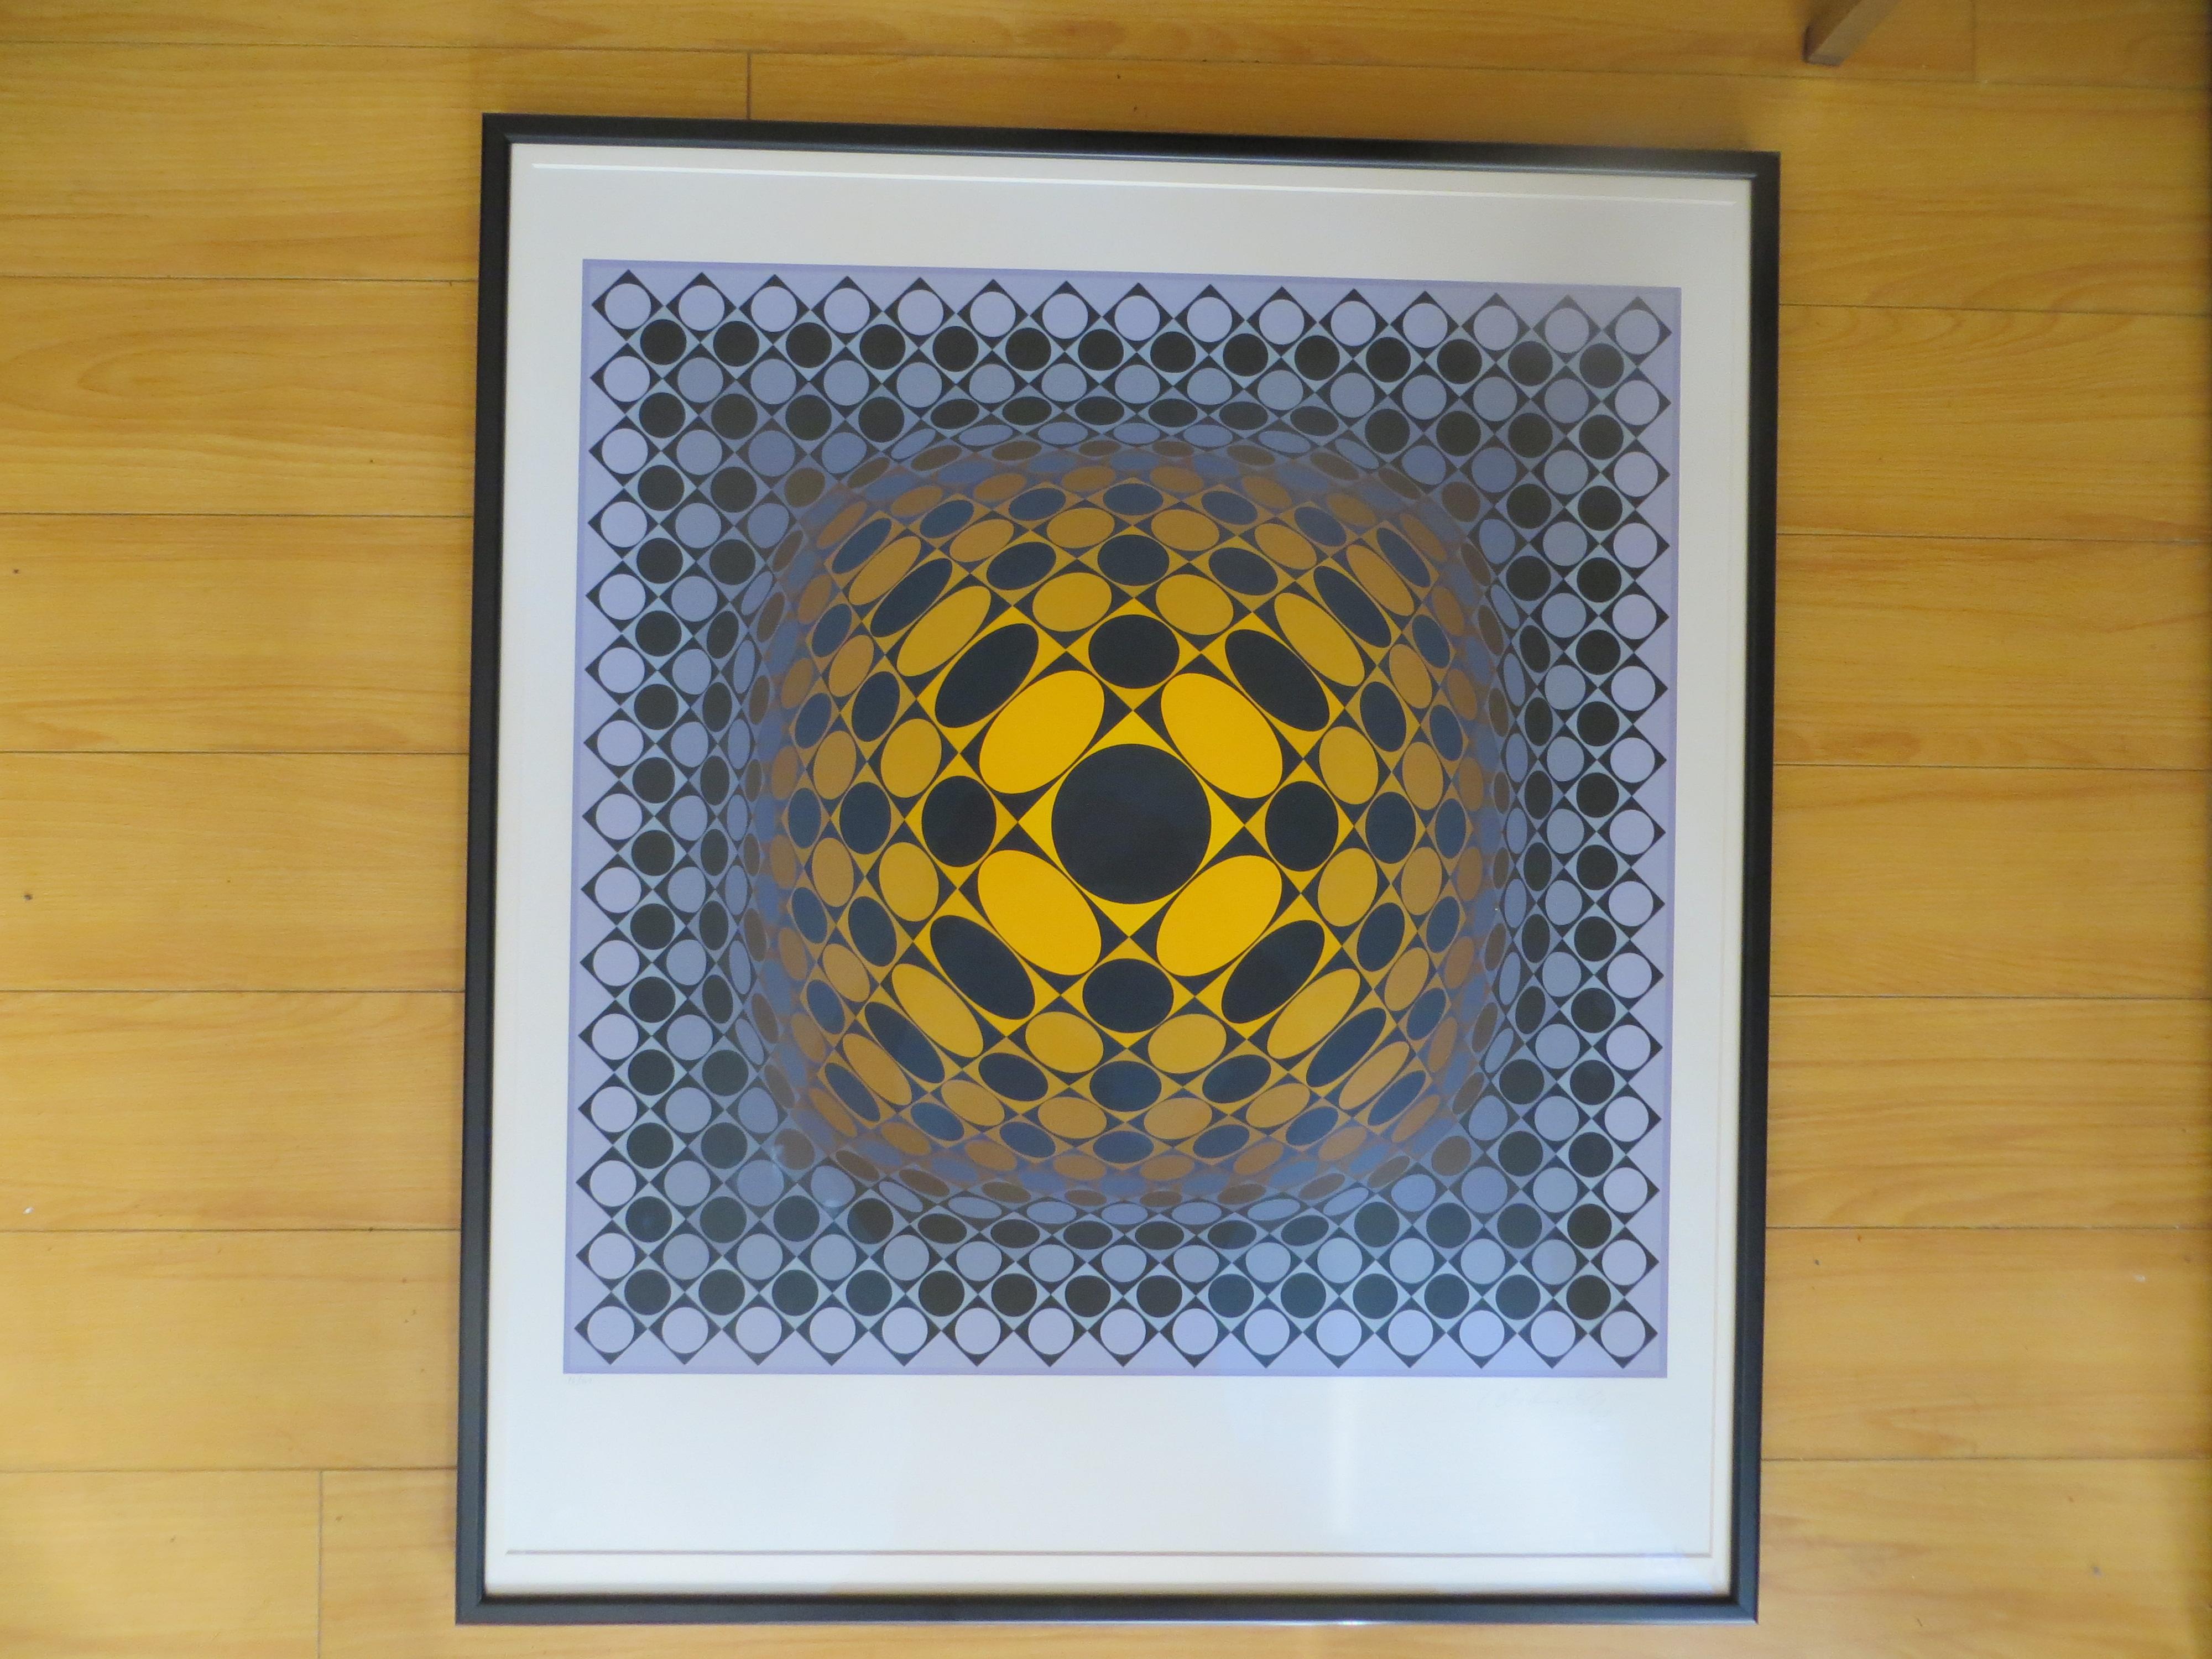 What are some facts about Victor Vasarely?